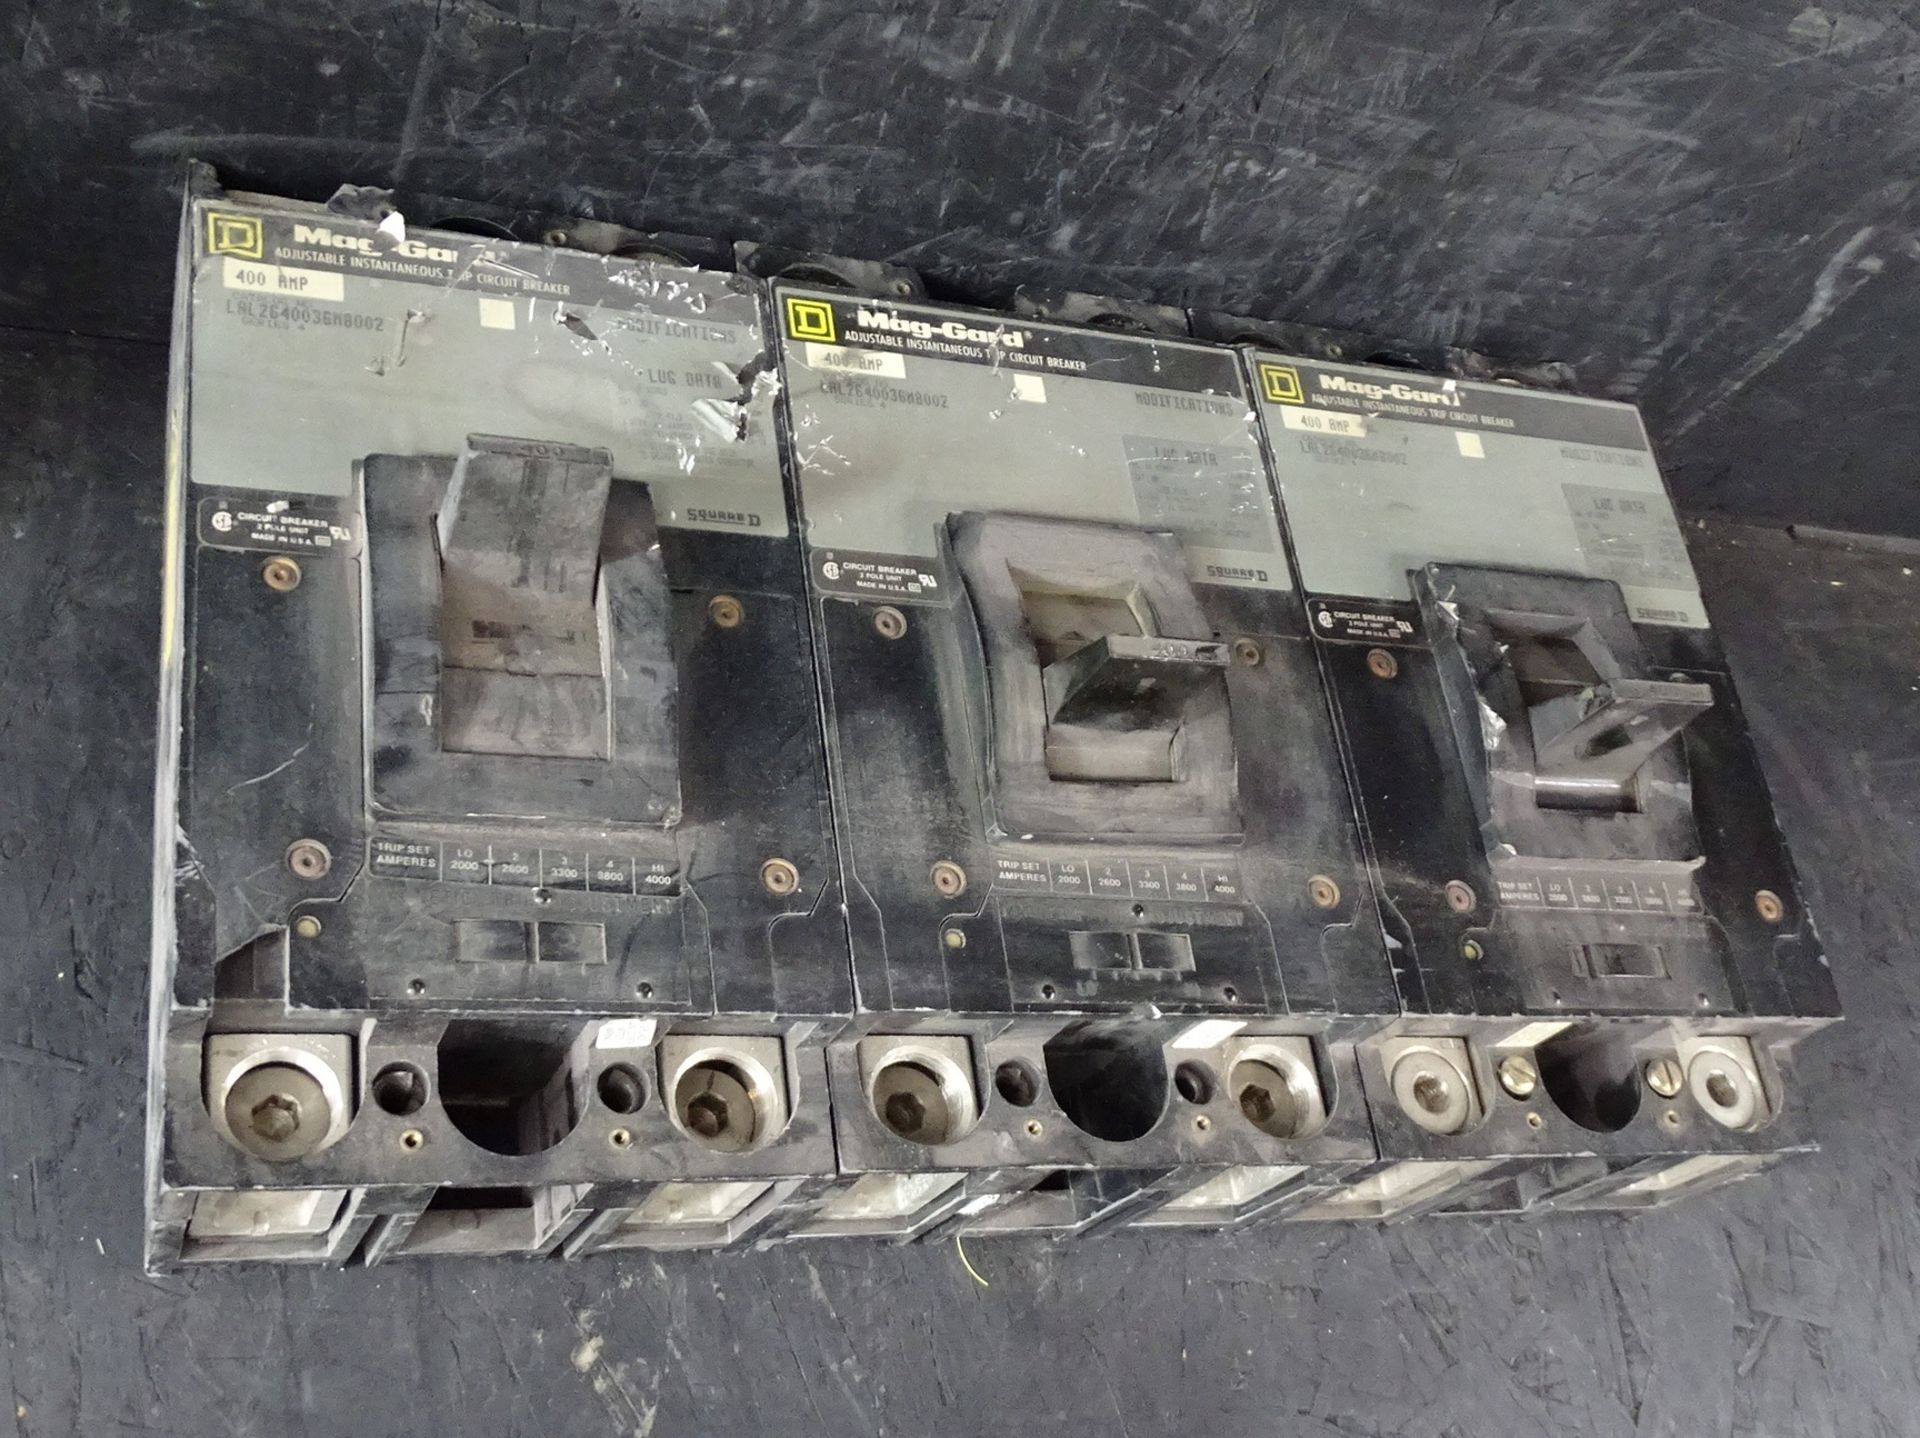 Square-D 400-Amp Series 4 Breaker Switches - Image 3 of 4